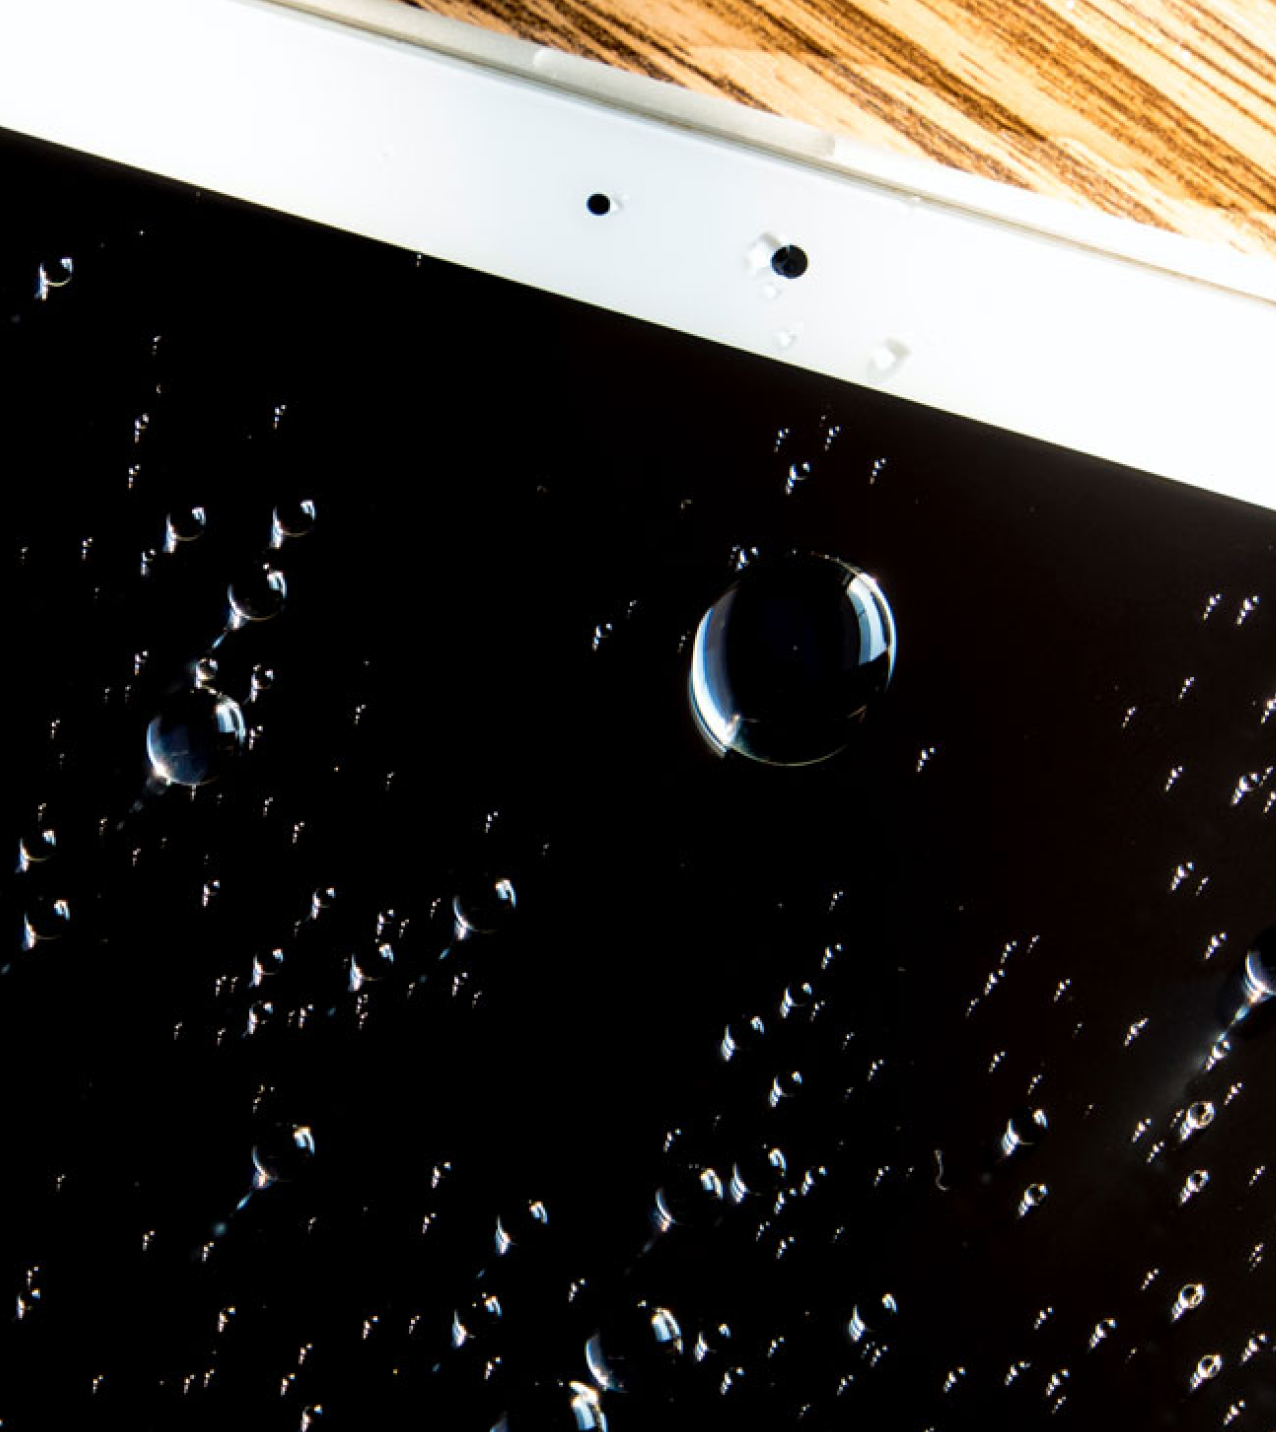 Beaded droplets of water on a tablet screen